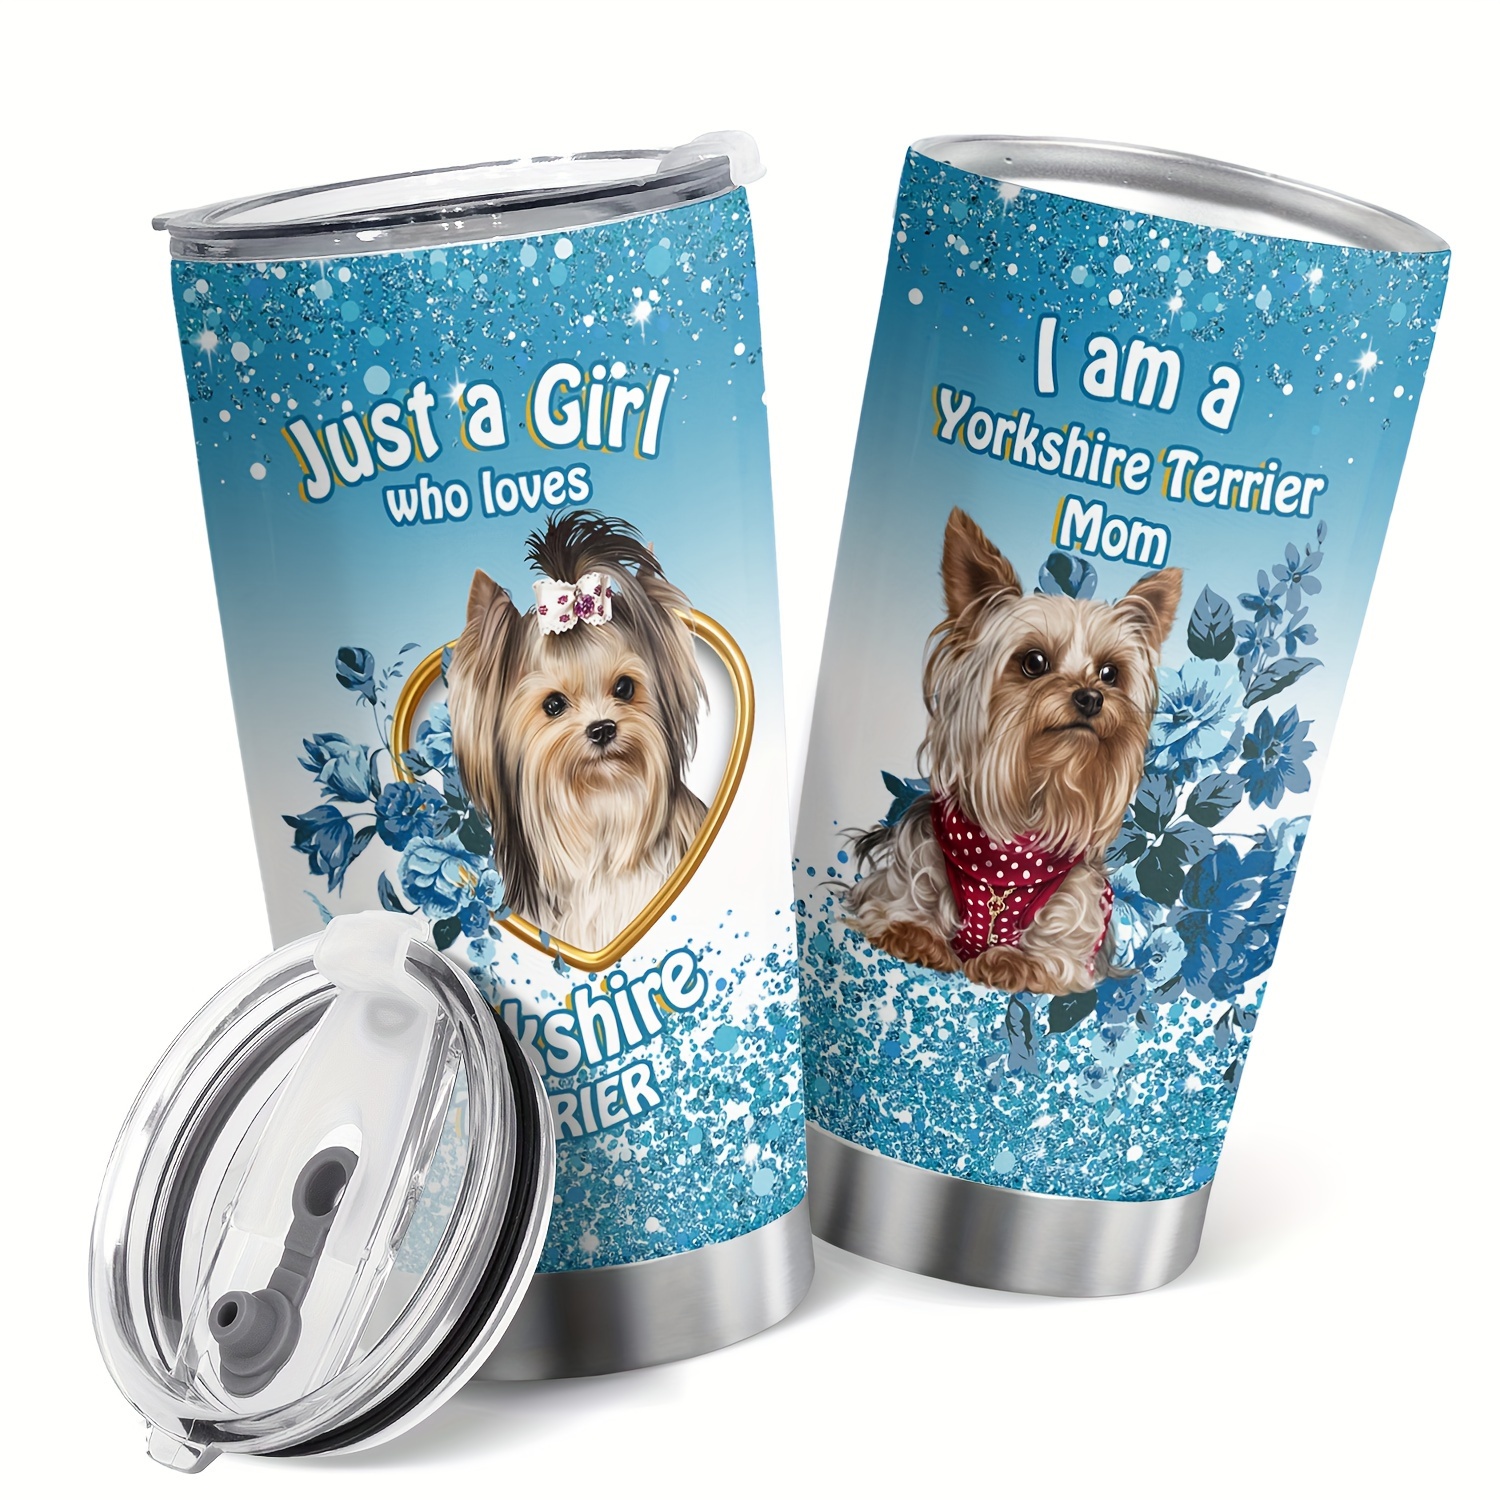 

1pc Stainless Steel Tumbler 20oz, "just A Girl Who Loves Yorkshire Terrier" Mom Insulated Travel Cup With Lid, Dual Drinking Modes, Dog Lover Gift